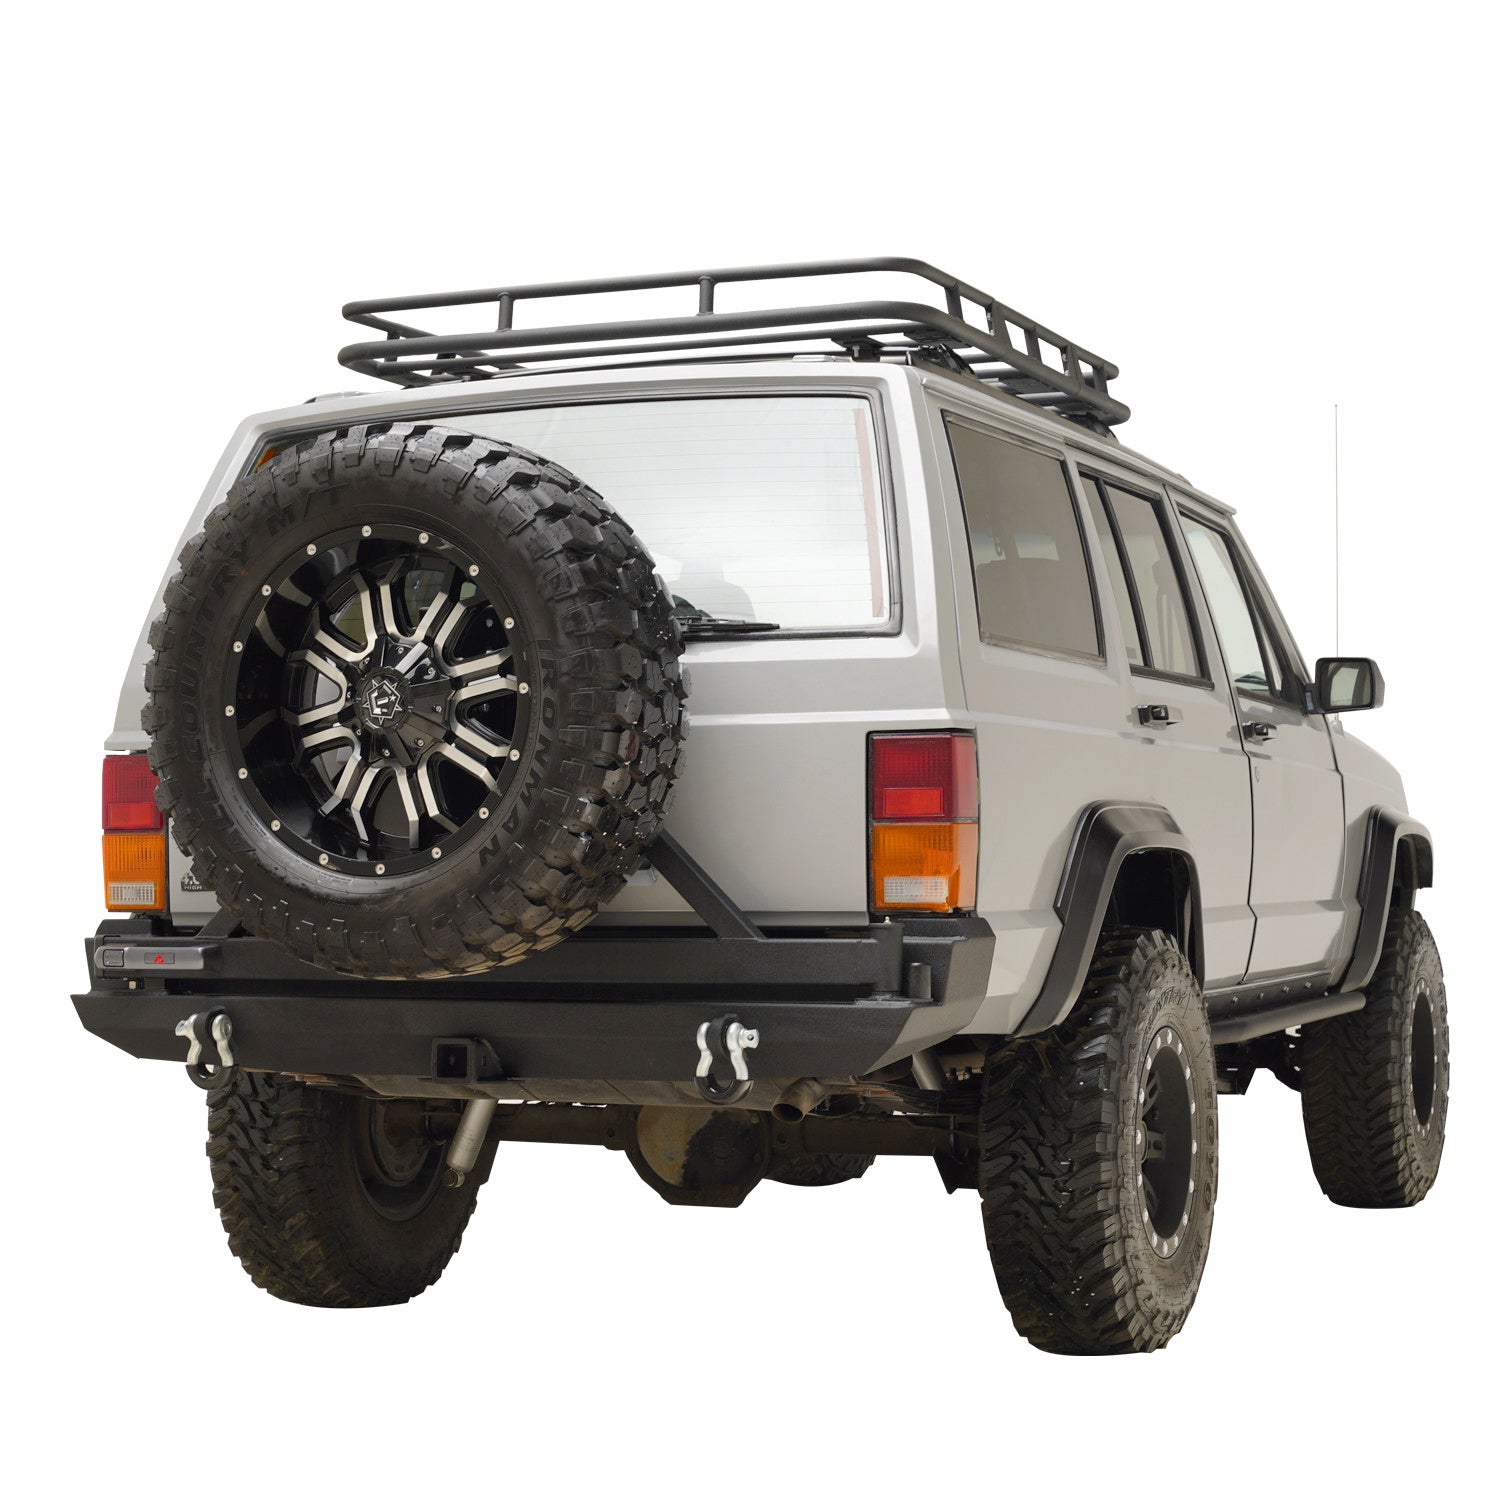 83-01 Jeep Cherokee XJ Rear Bumper with Tire Carrier (51-0911)